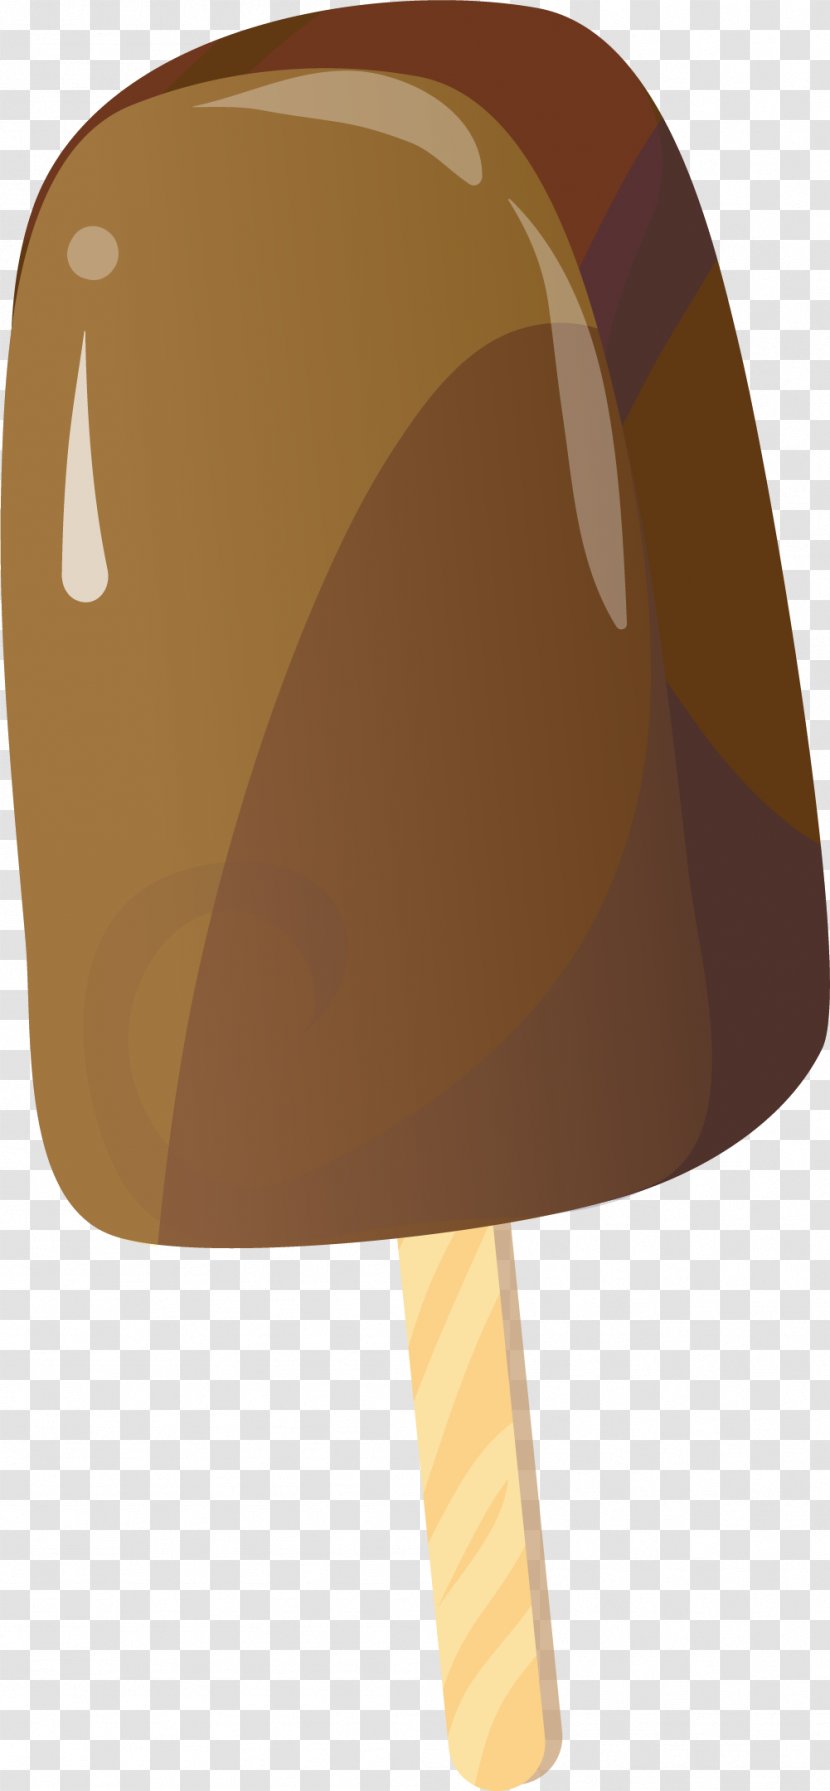 Angle - Brown - Chocolate Popsicle Material Transparent PNG